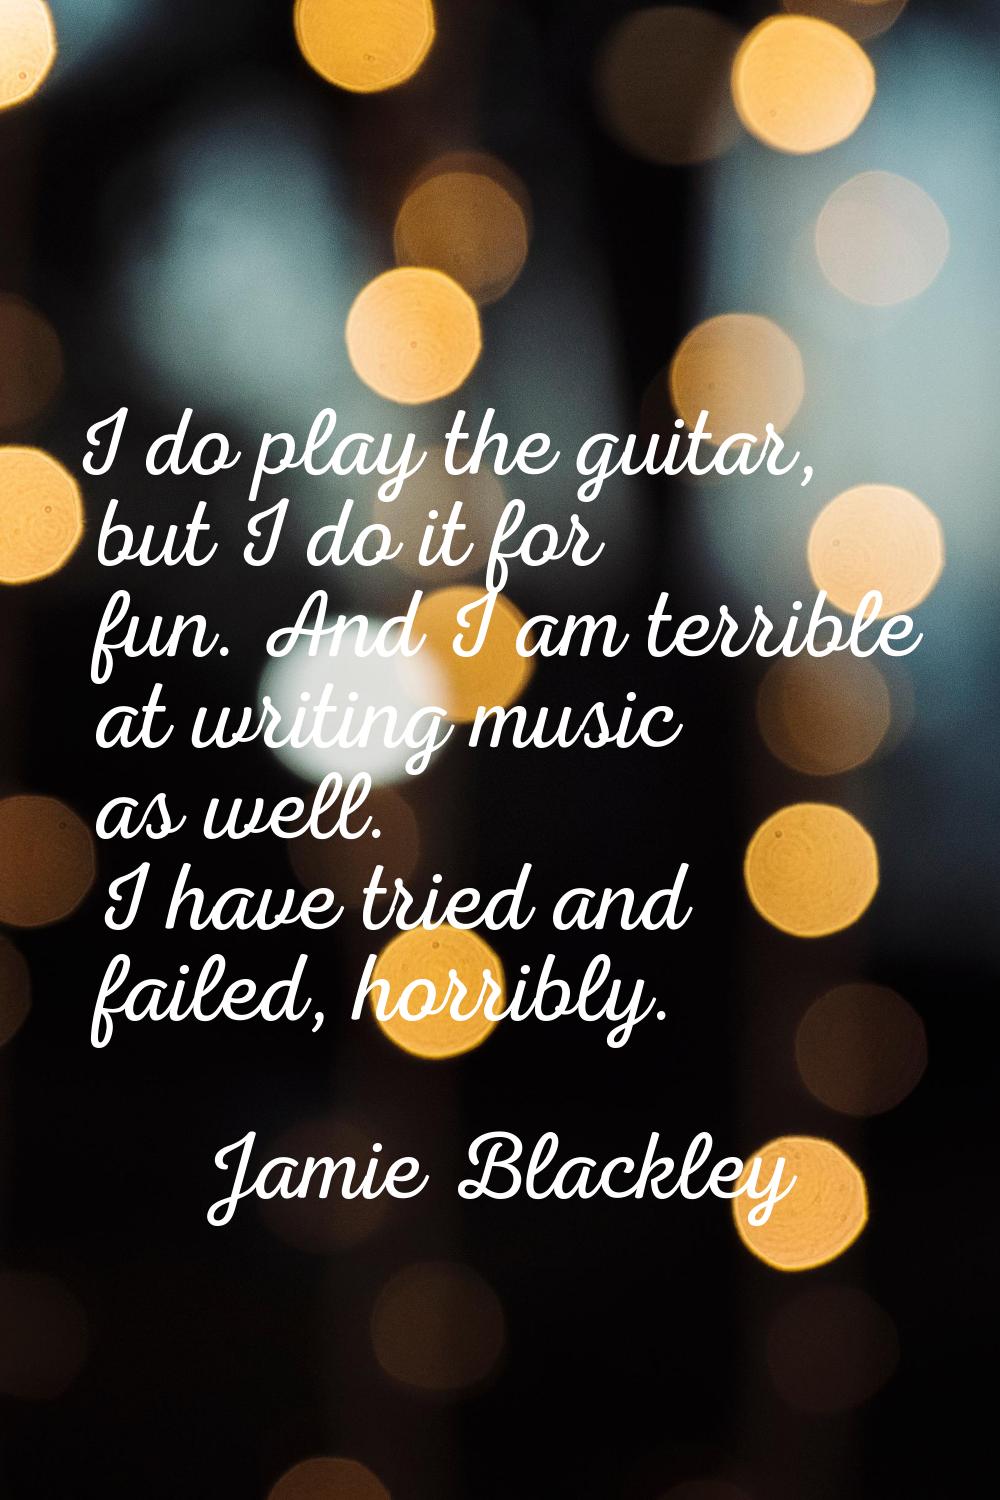 I do play the guitar, but I do it for fun. And I am terrible at writing music as well. I have tried